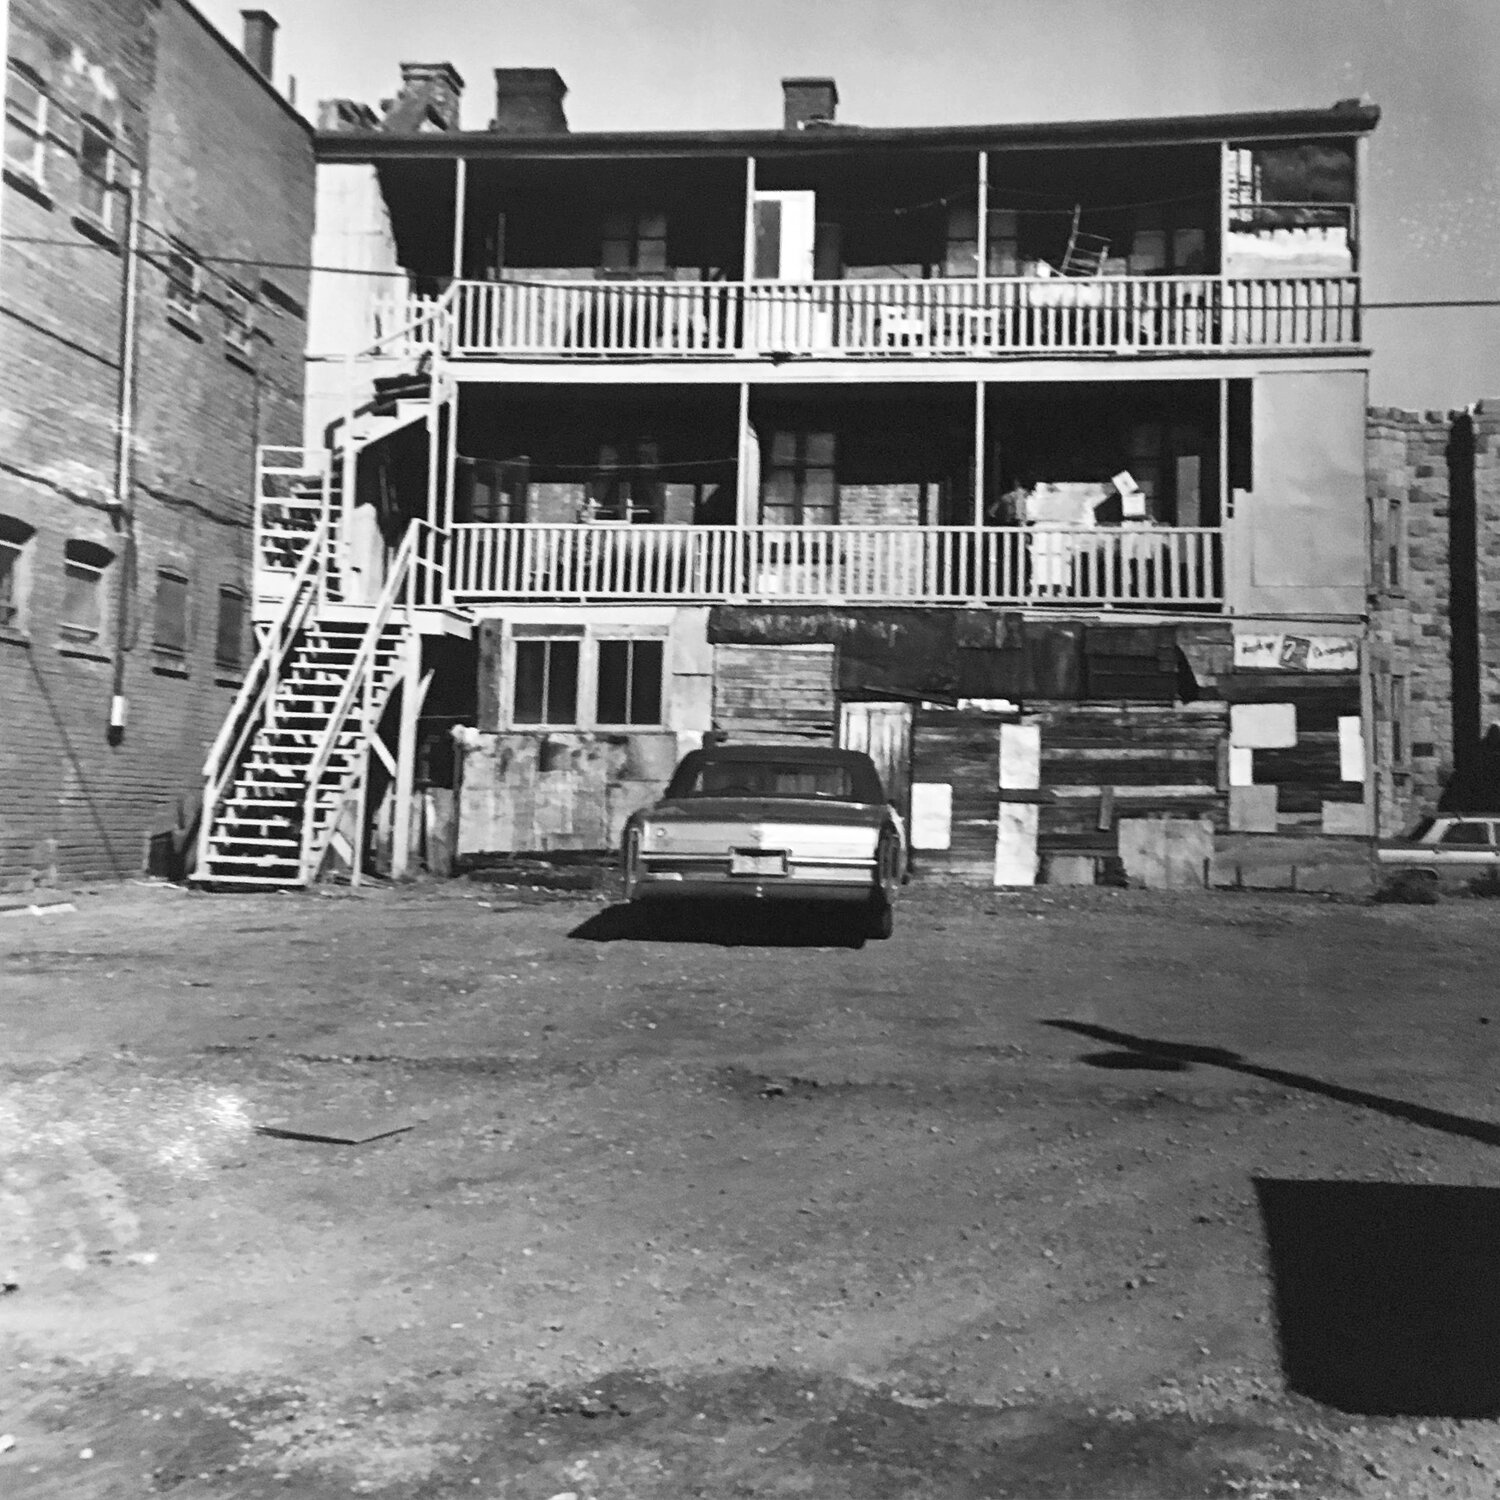 Streetscape with Cadillac, Montreal, 1971